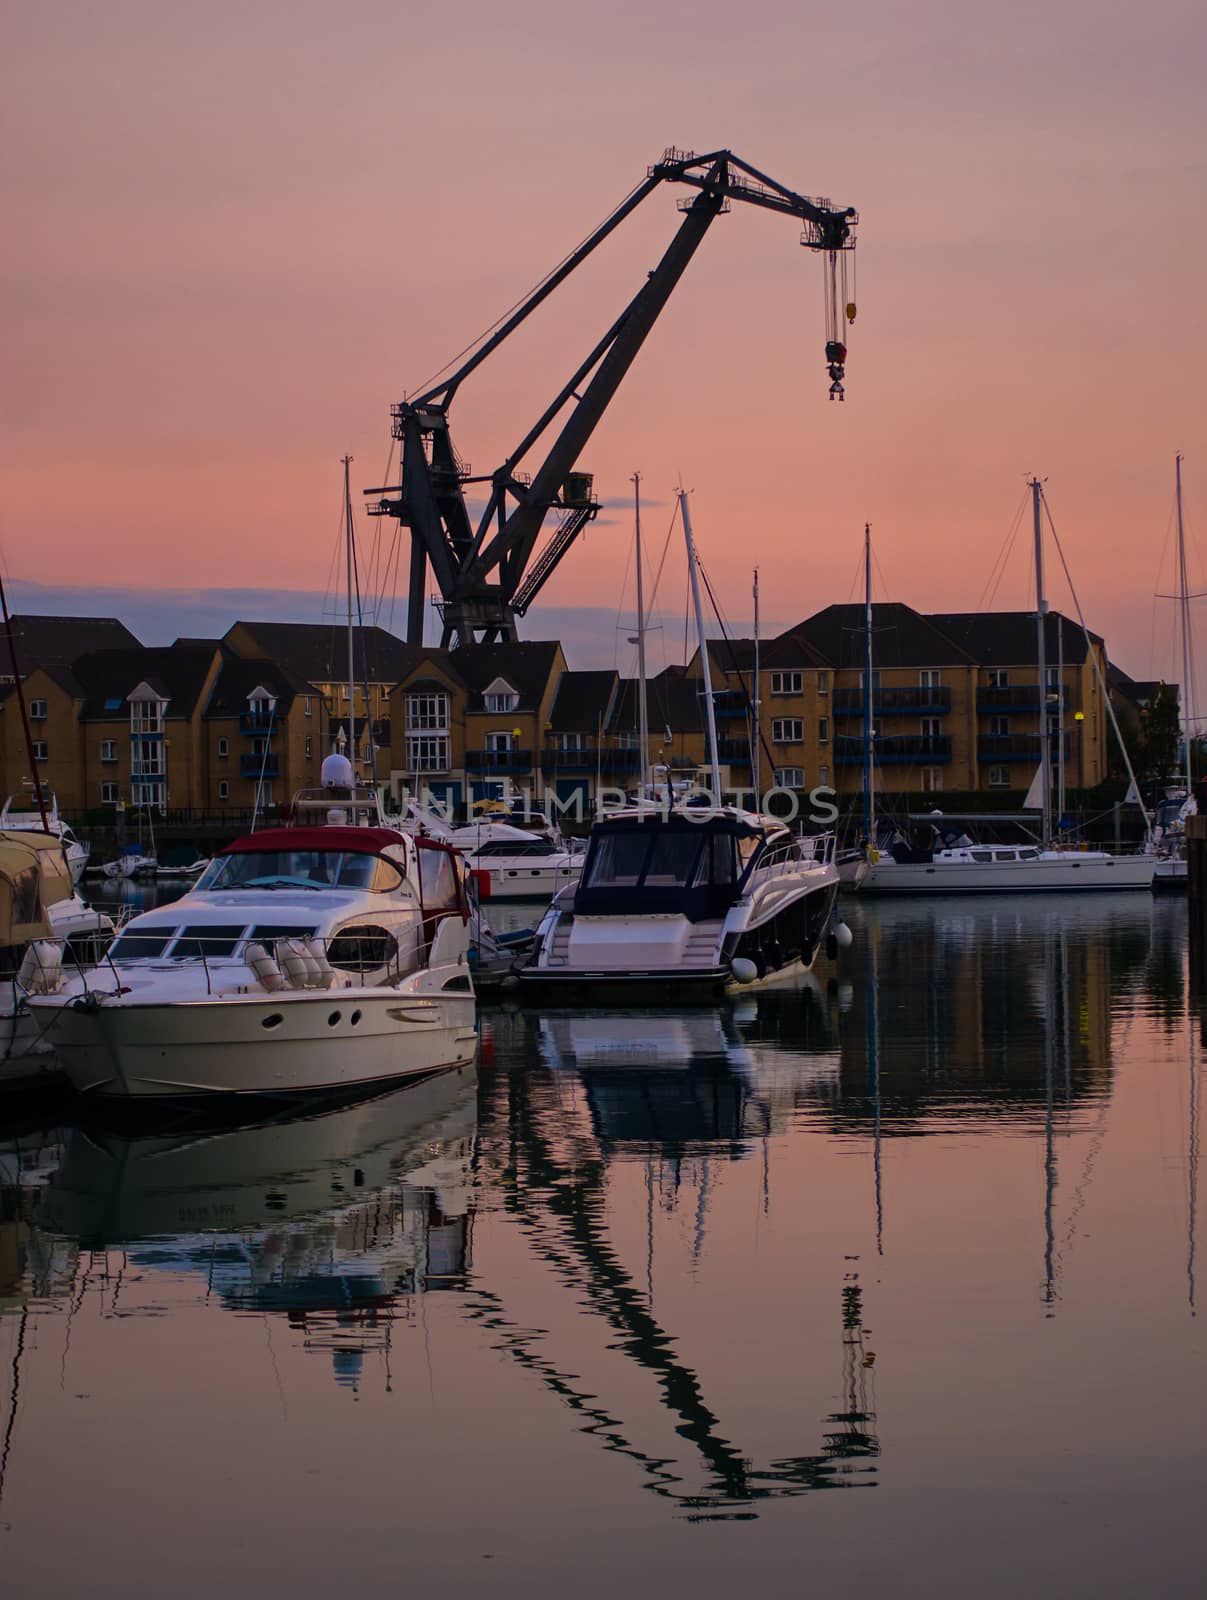 Dockside crane silhouetted by gary_parker